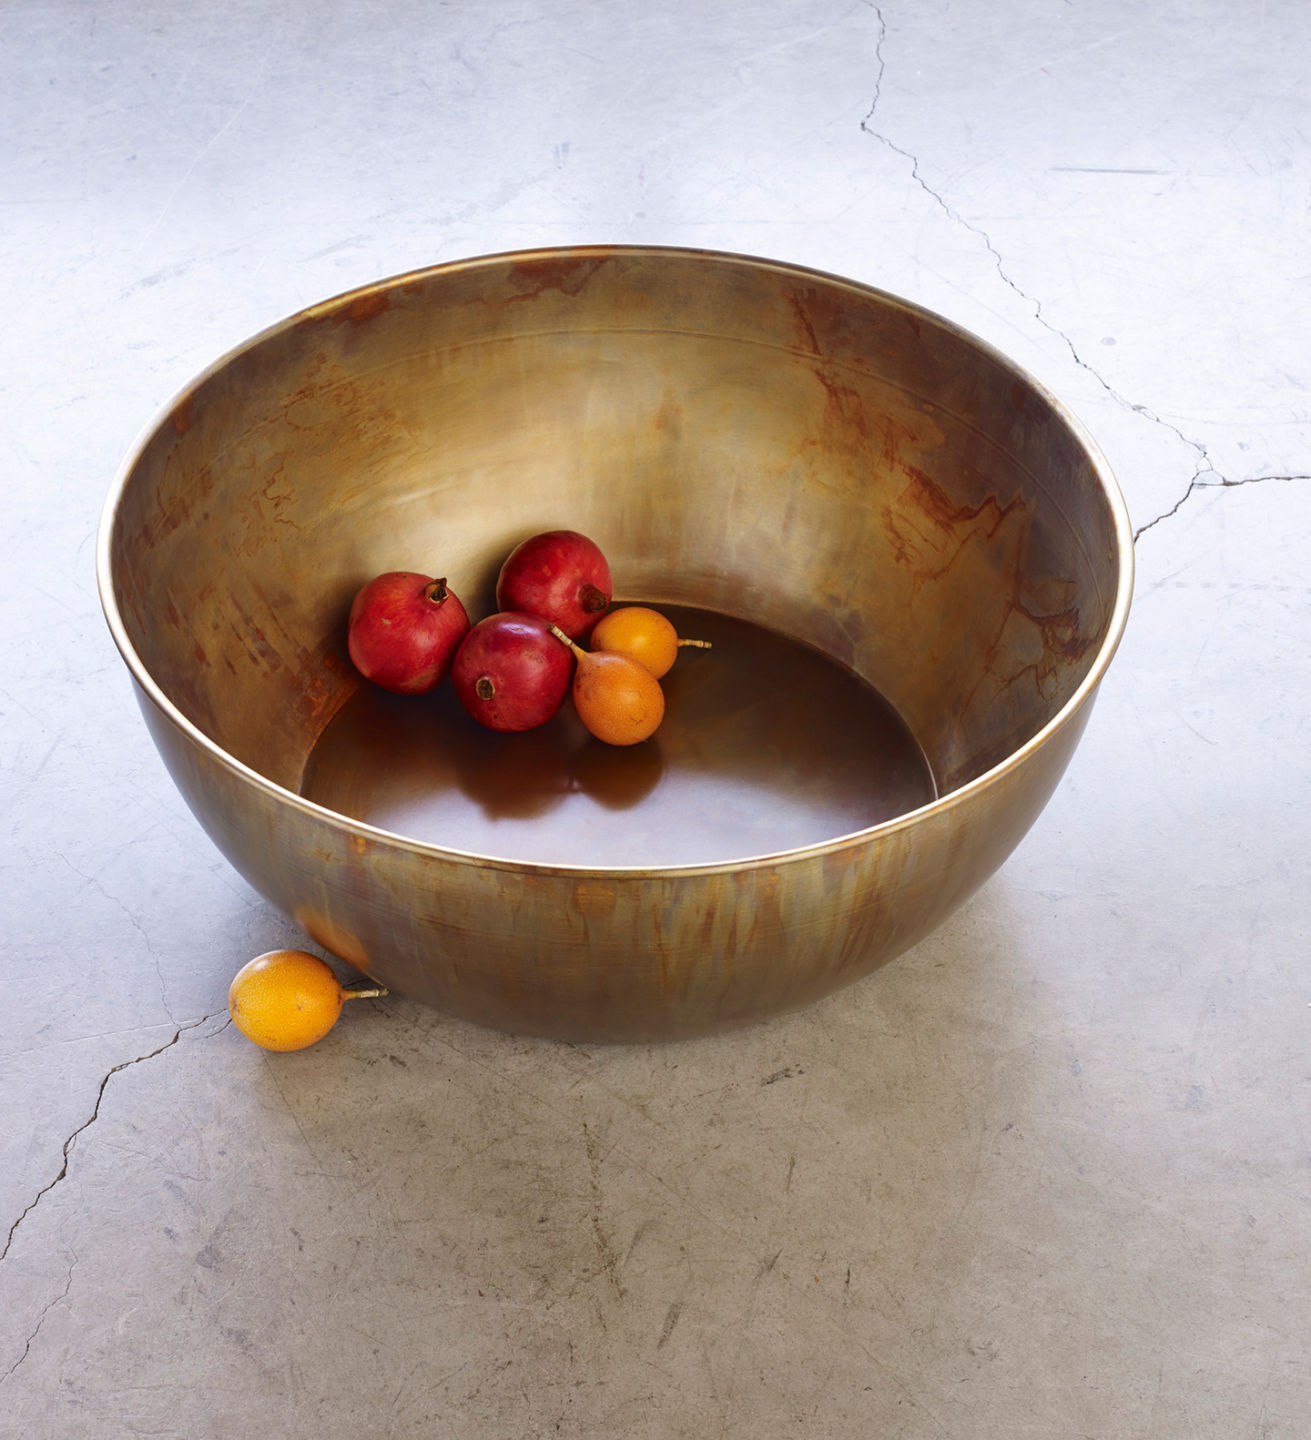 Lovely oversized brass bowls. As featured in New York Spaces. Shown with orange and yellow tomatoes inside. For sale at Studio Sturdy and created by Martha Sturdy